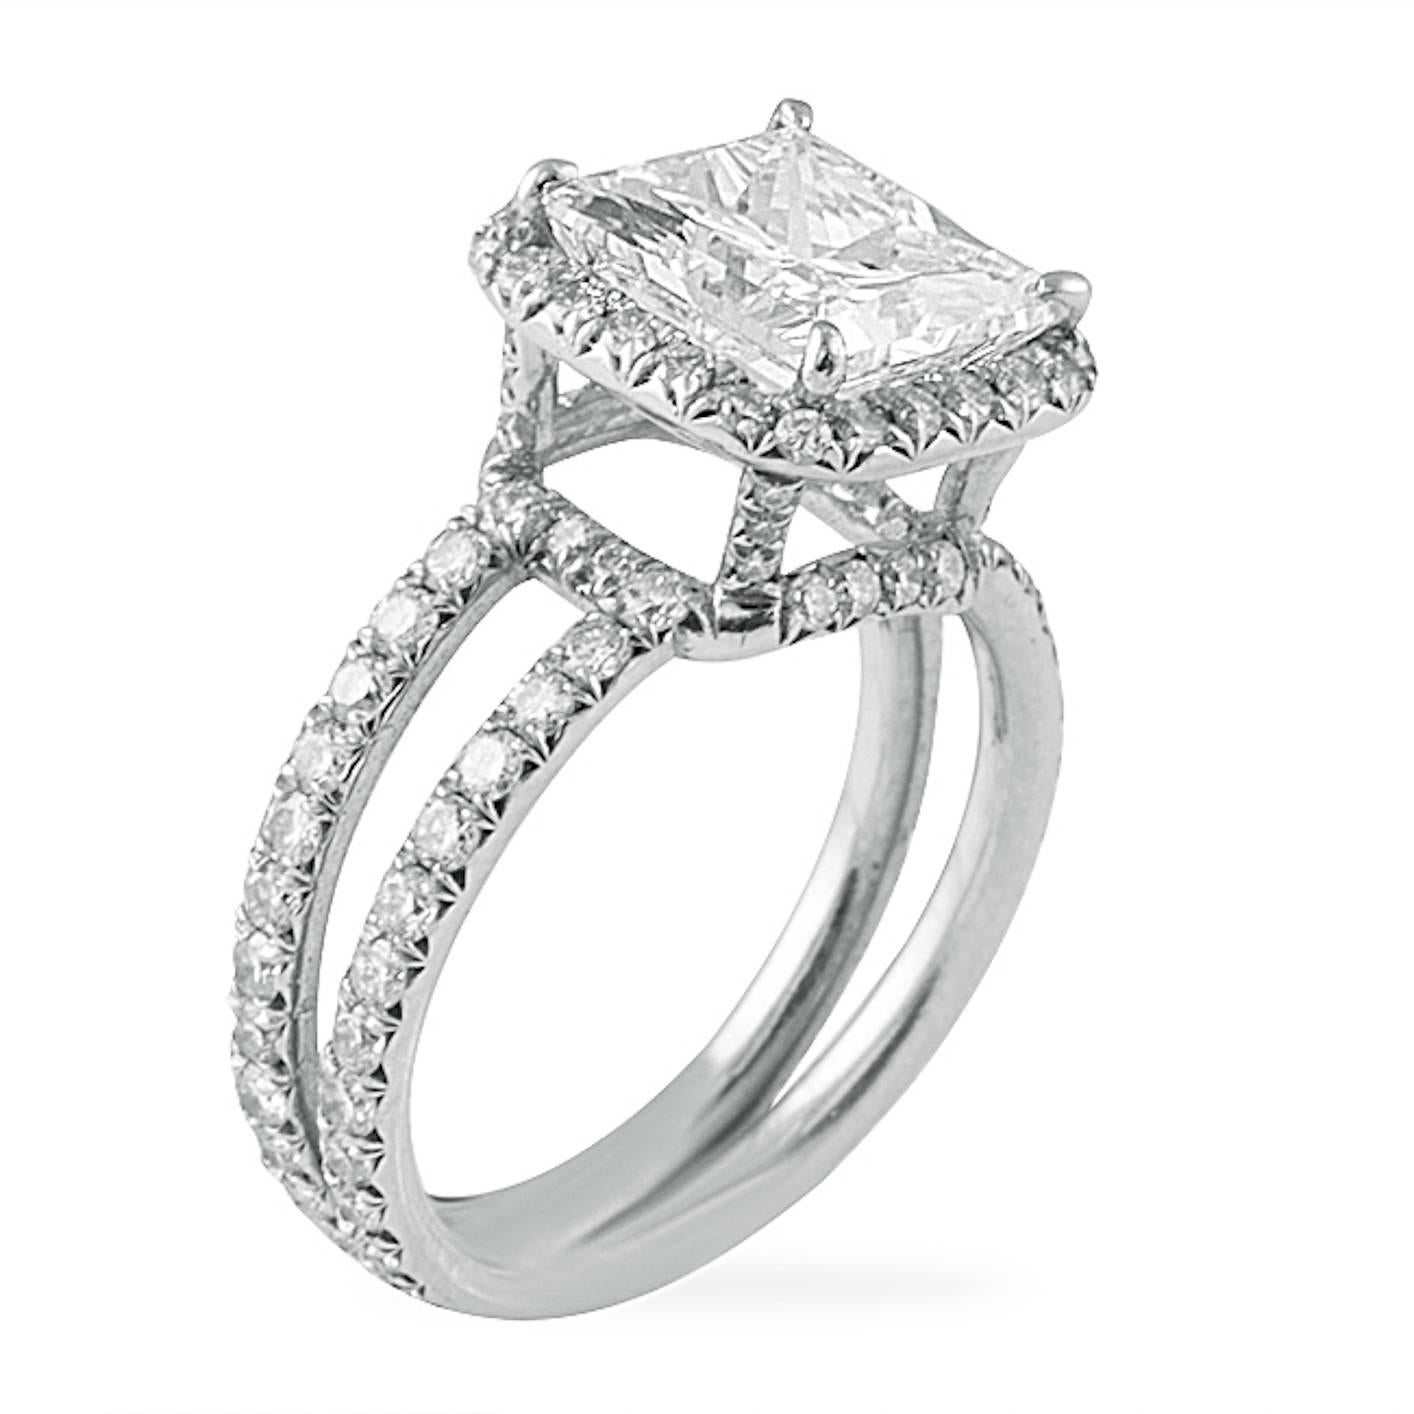 Platinum Engagement ring that features 3.00ct G-VS2 GIA Certified Princess Cut main stone Diamond, surrounded by 1.40cts halo and sides diamonds.